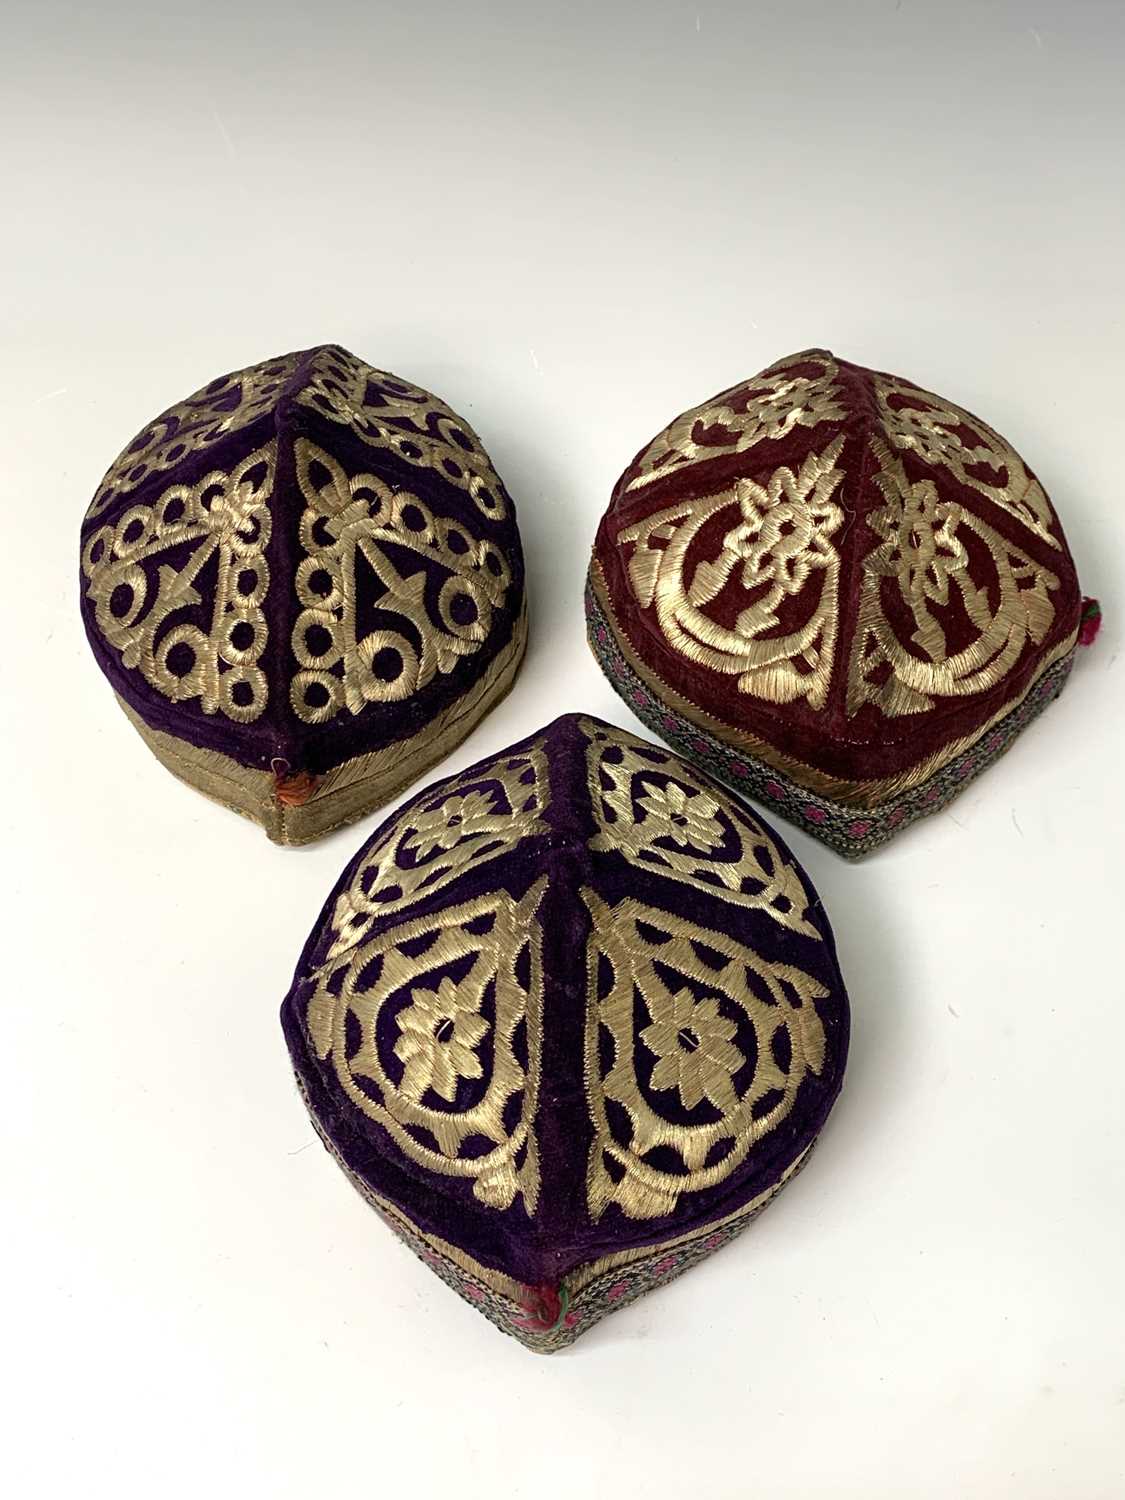 Three eastern skull caps, circa 1920, each embroidered and with gold thread decoration, together a - Image 7 of 13